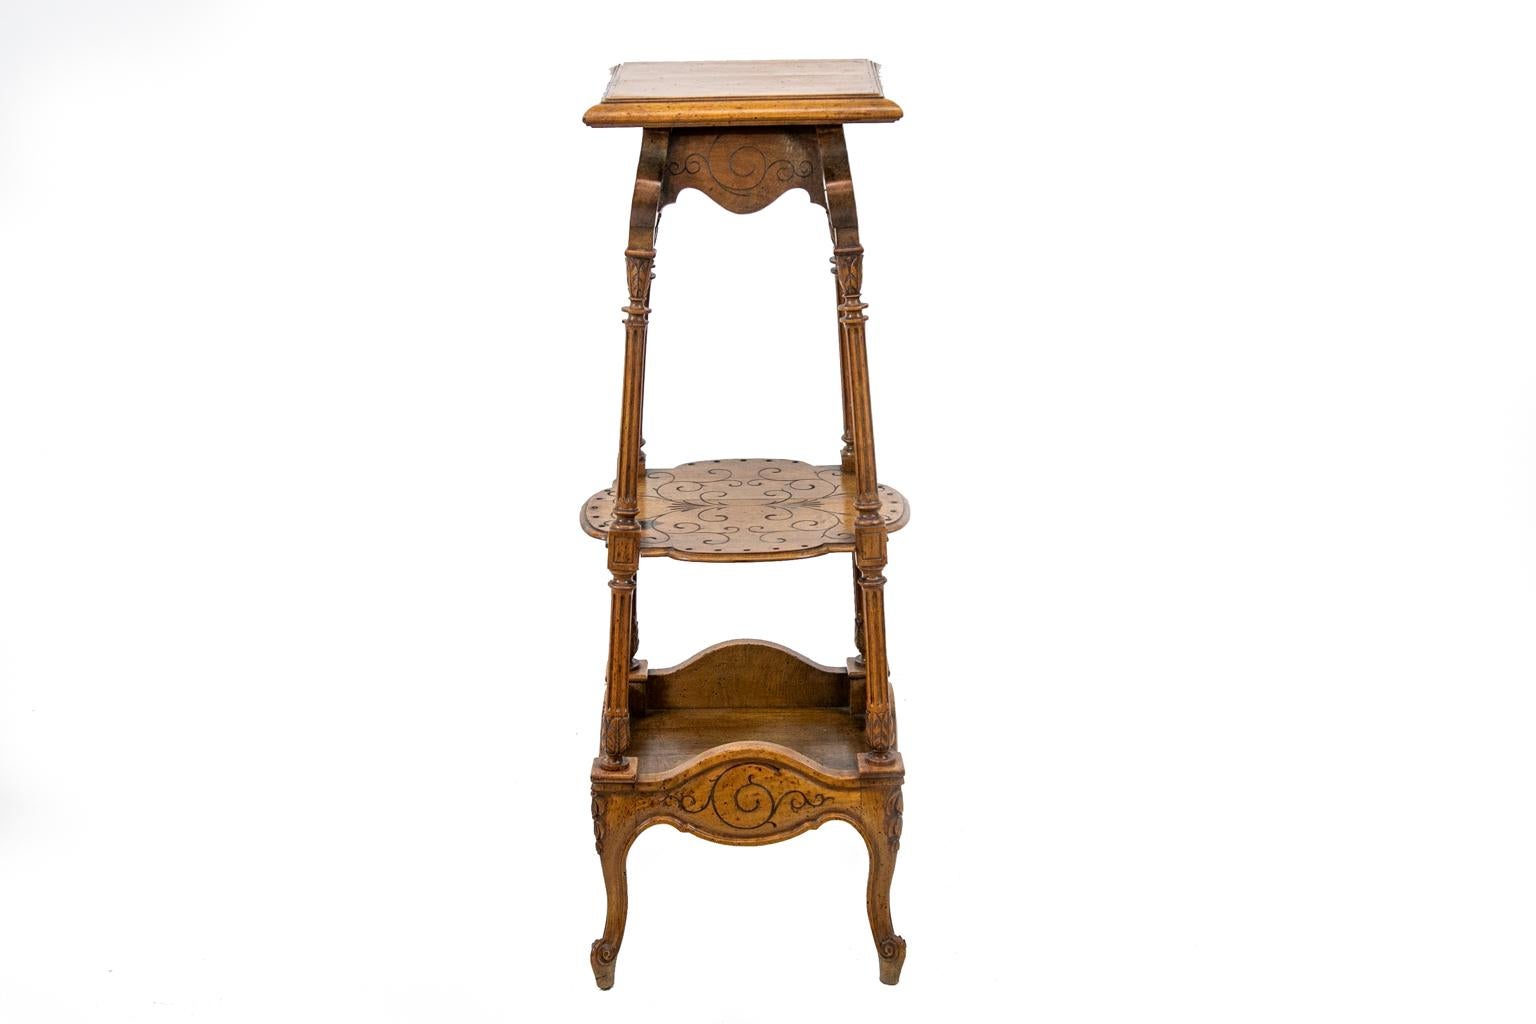 French carved walnut three tiered stand, with the aprons and middle shelf having incised carved arabesques. The support columns are fluted with acanthus leaf capitals and bases. The base terminates in carved french scrolled feet.